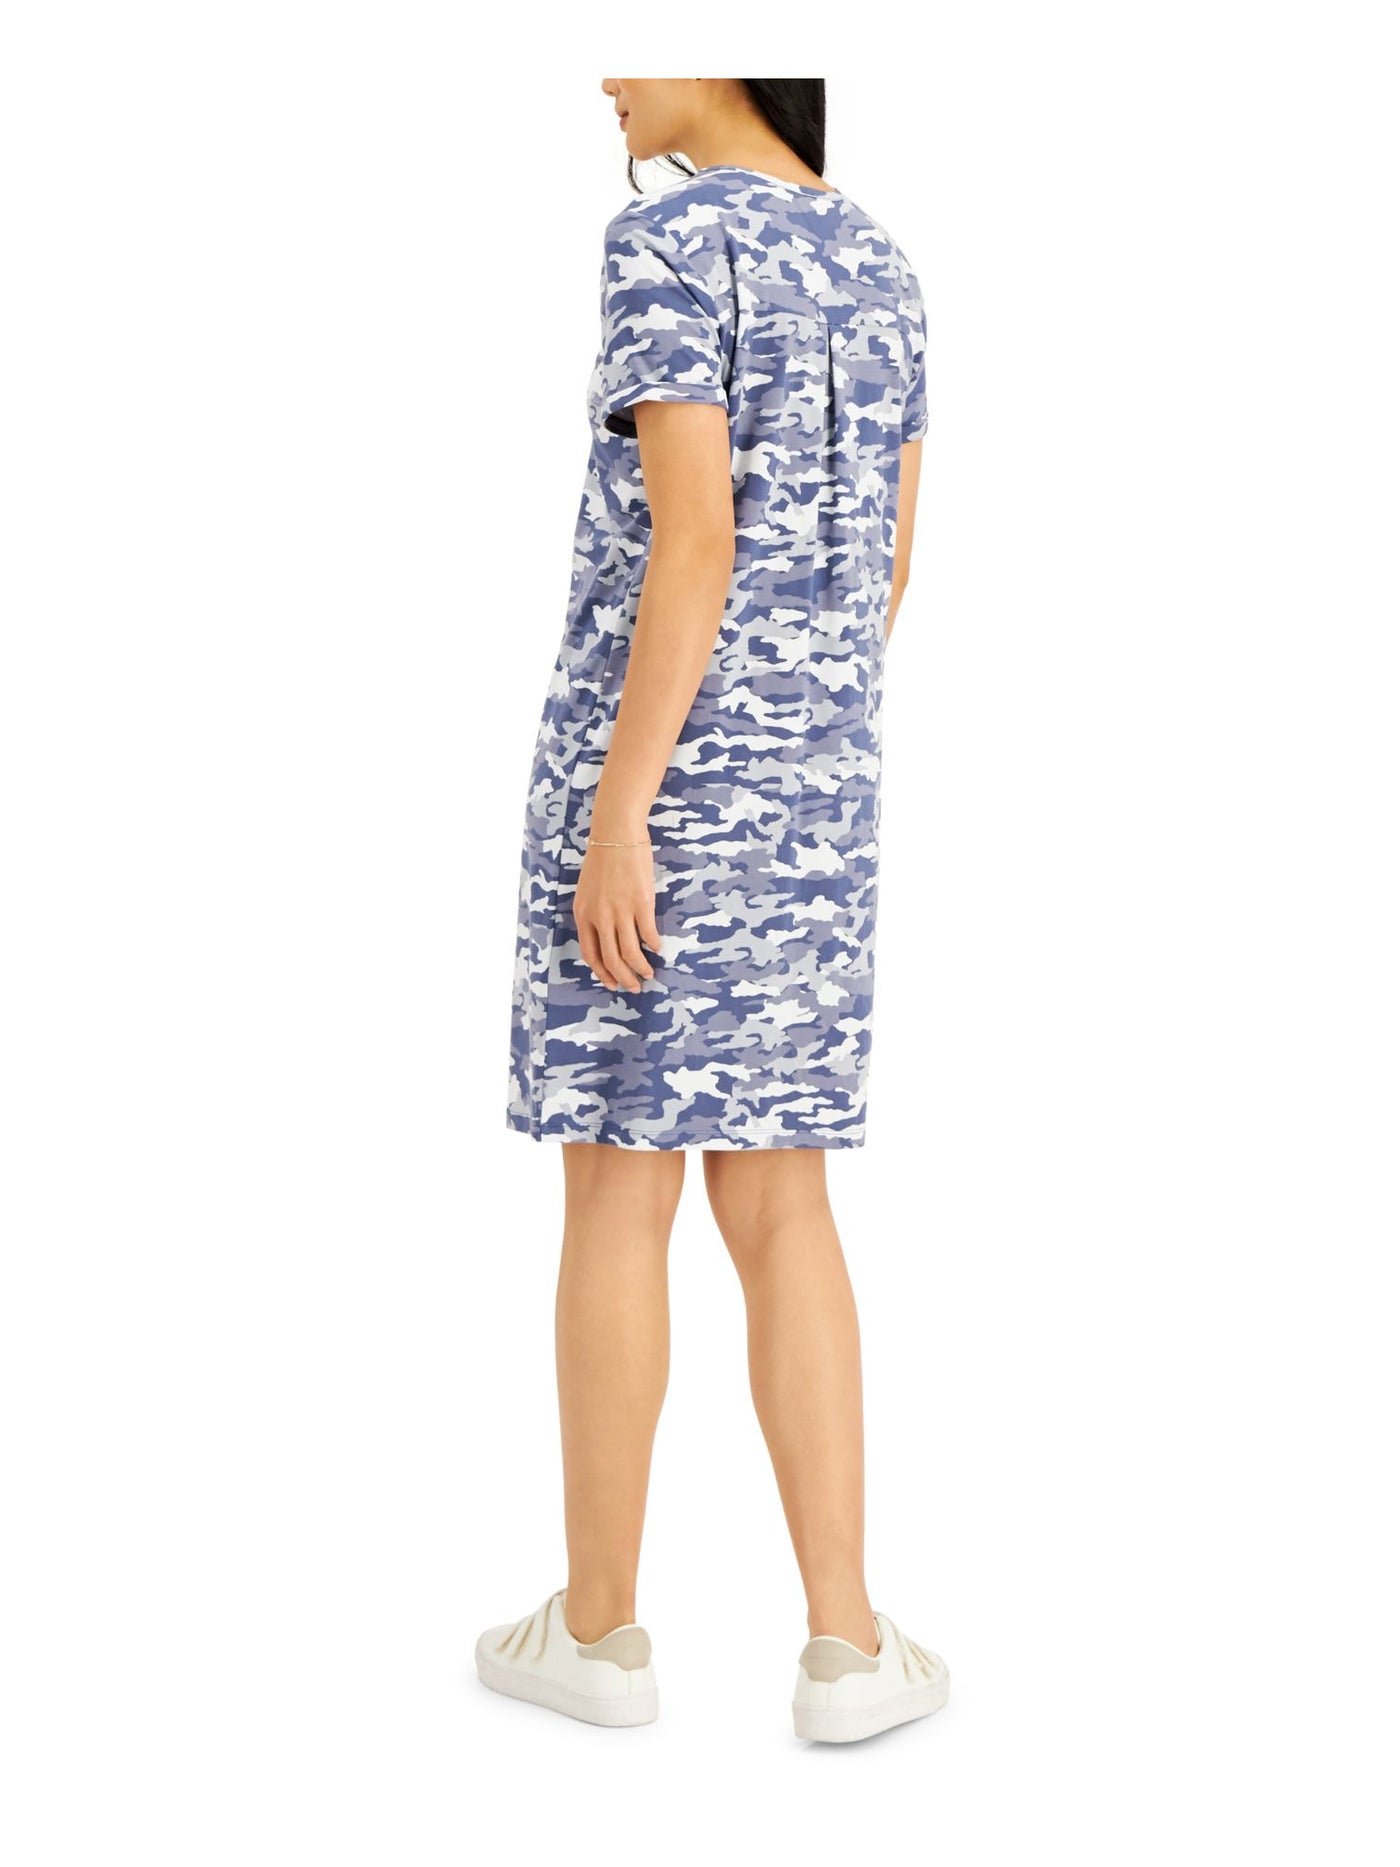 STYLE & COMPANY Womens Blue Camouflage Crew Neck Above The Knee Shirt Dress XL